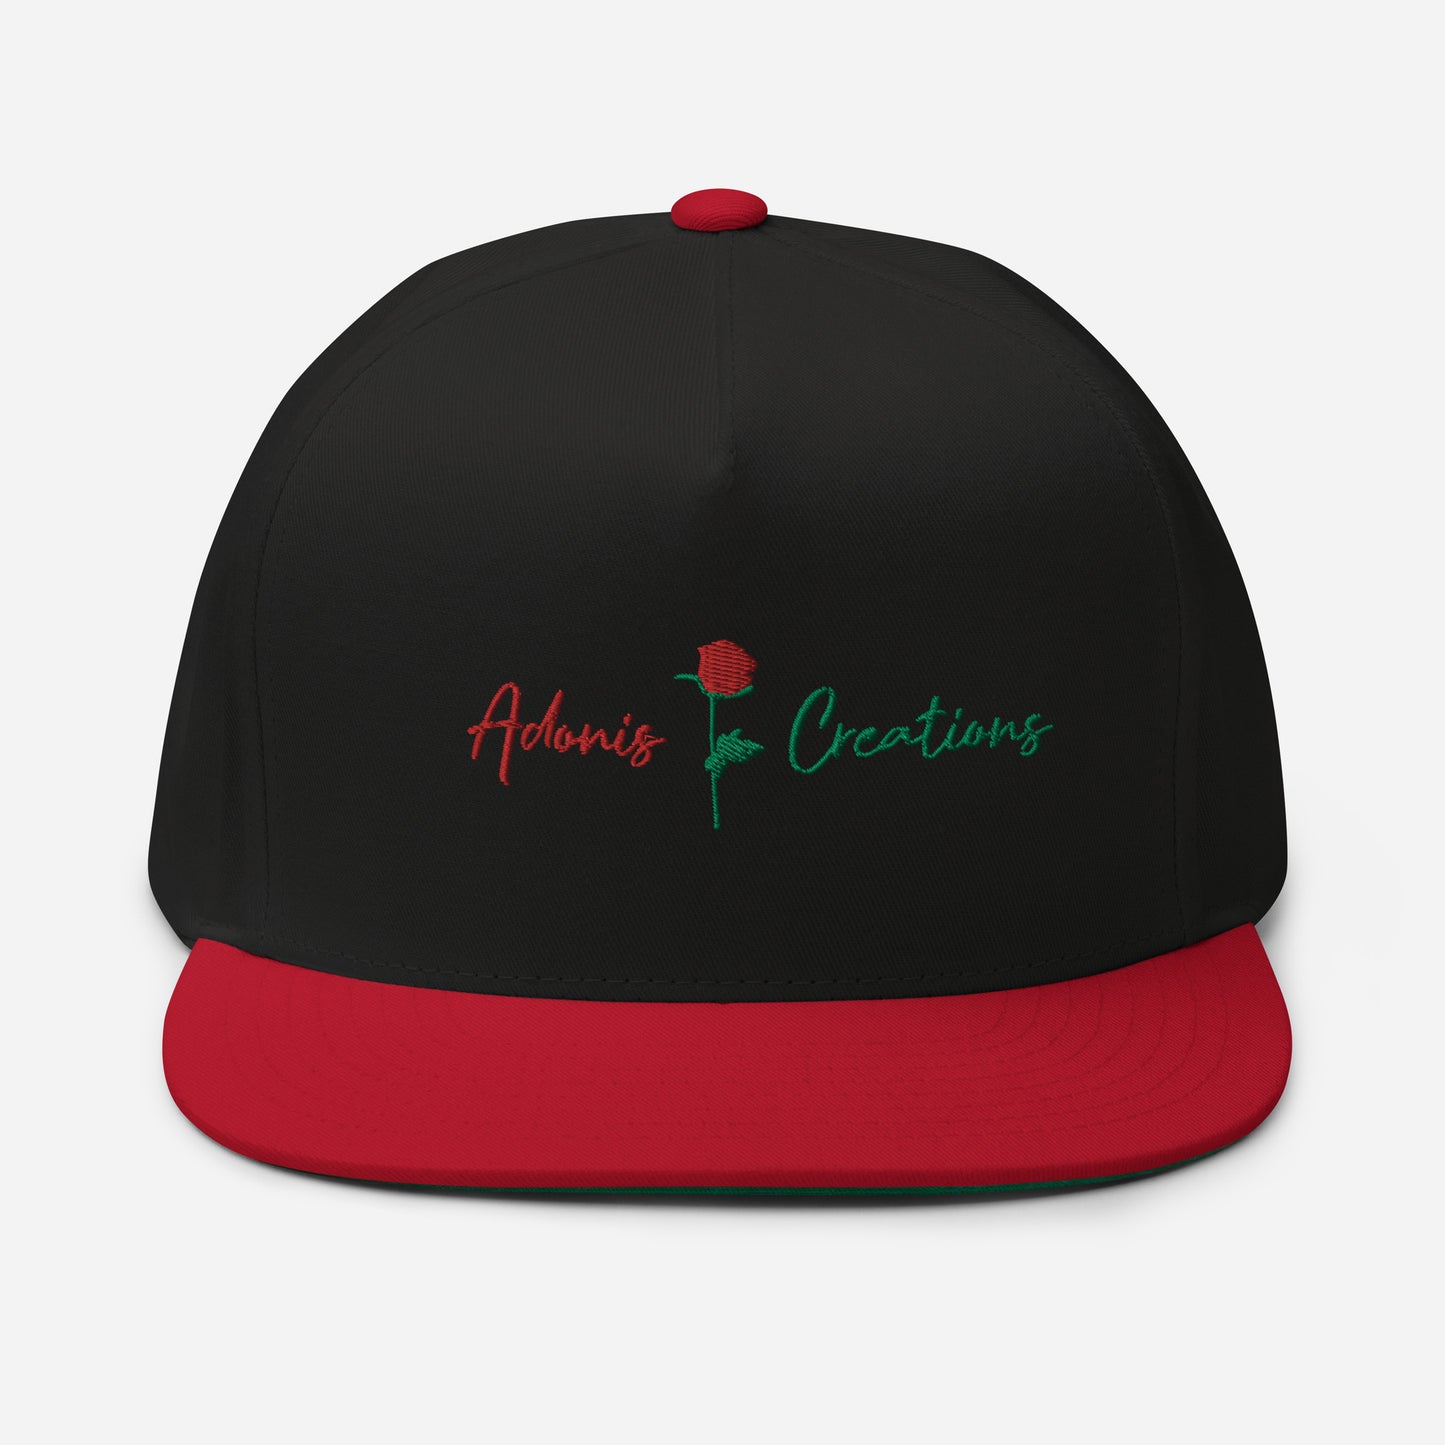 Adonis-Creations - Flat Bill Fitted Baseball Cap